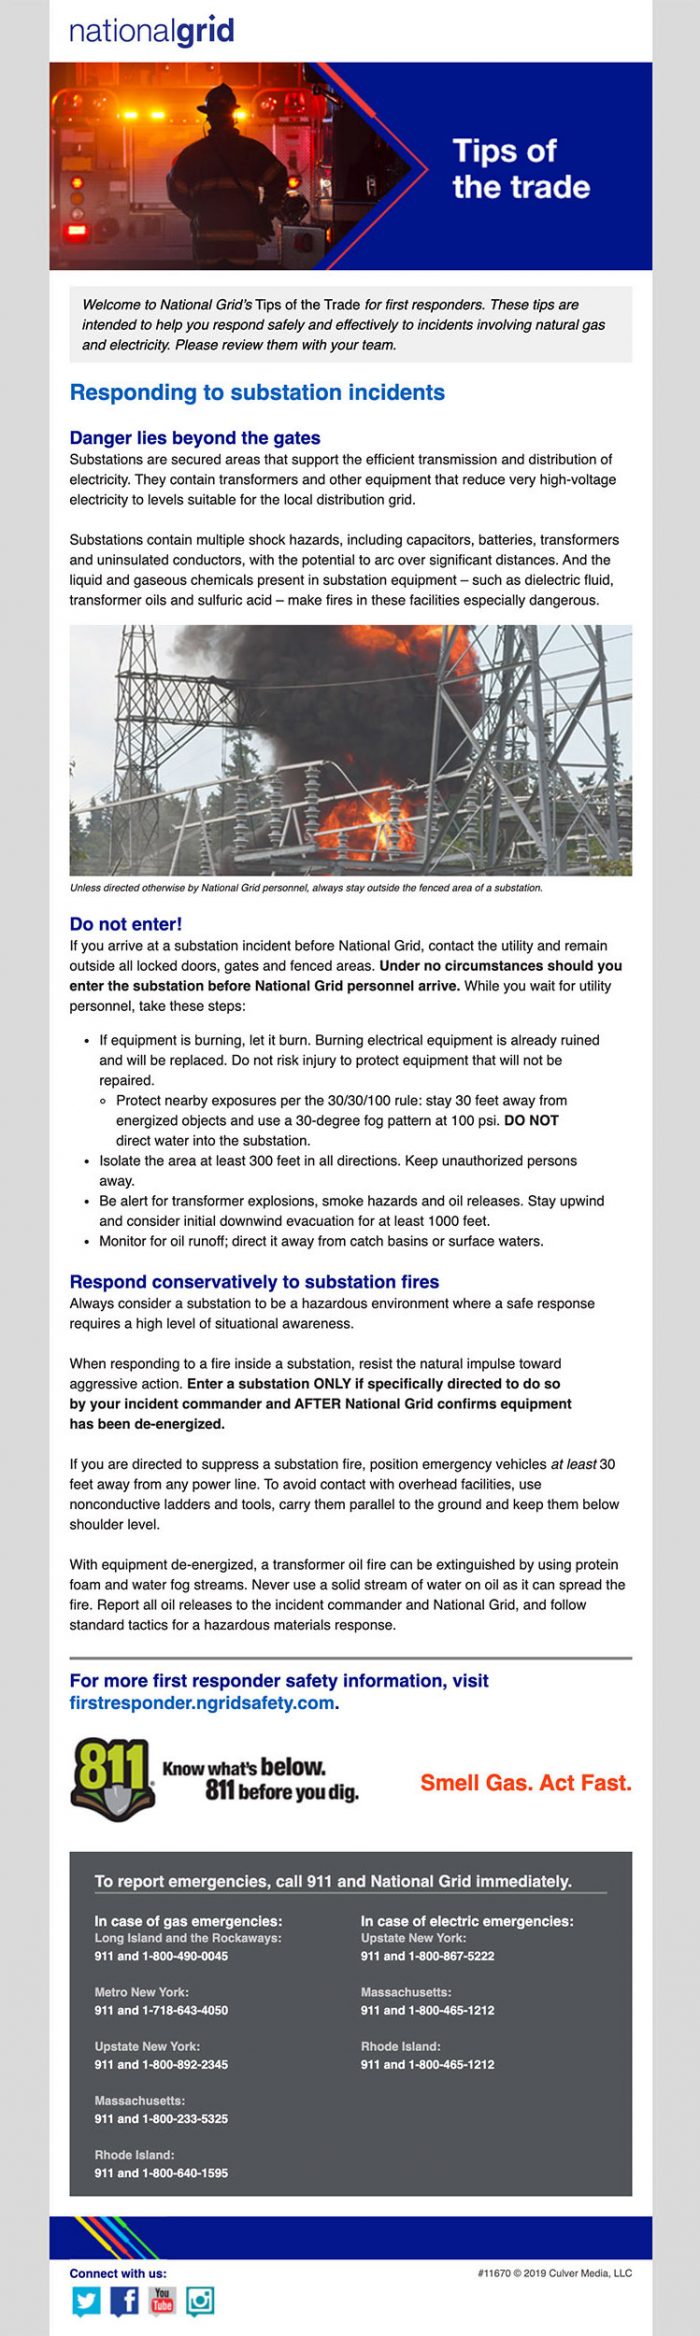 Tips of the Trade – Responding to substation incidents